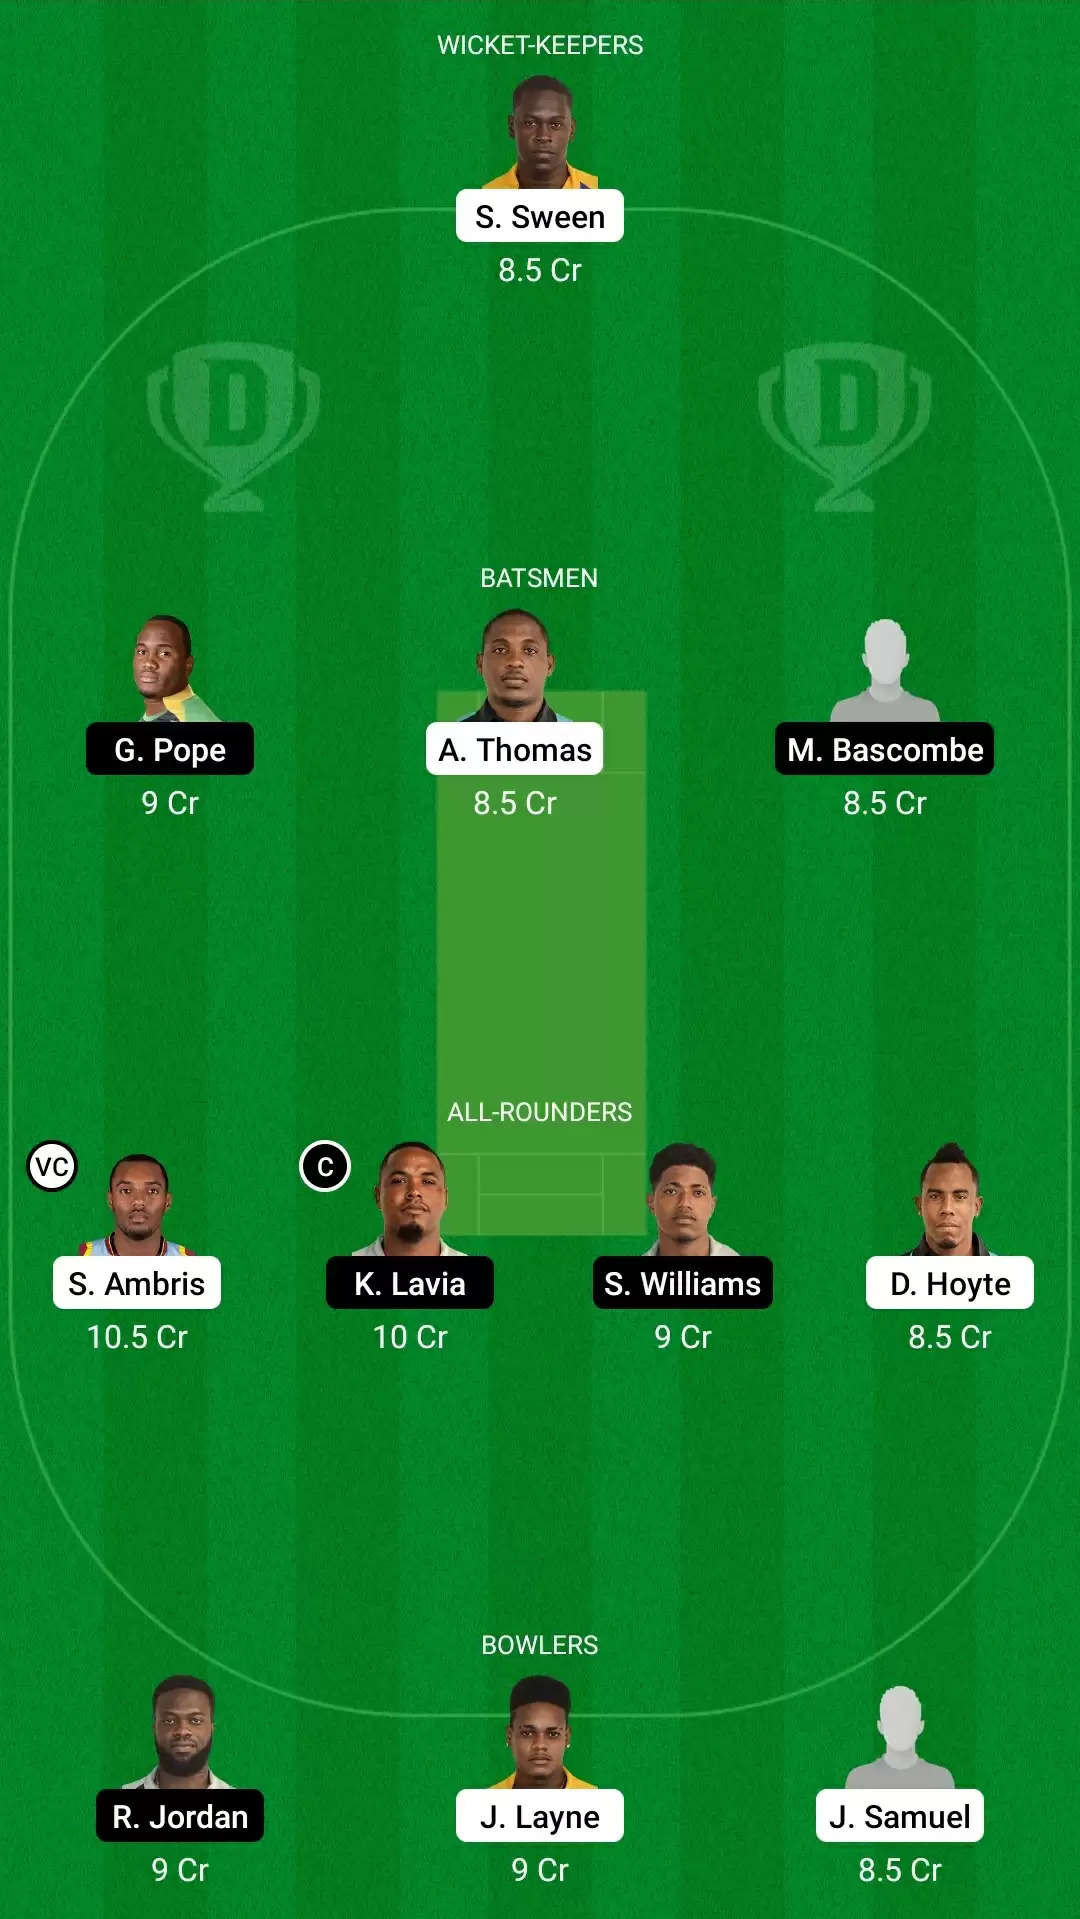 Vincy Premier League 2021, Match 13: SPB vs FCS Dream11 Prediction, Fantasy Cricket Tips, Team, Playing 11, Pitch Report, Weather Conditions and Injury Update